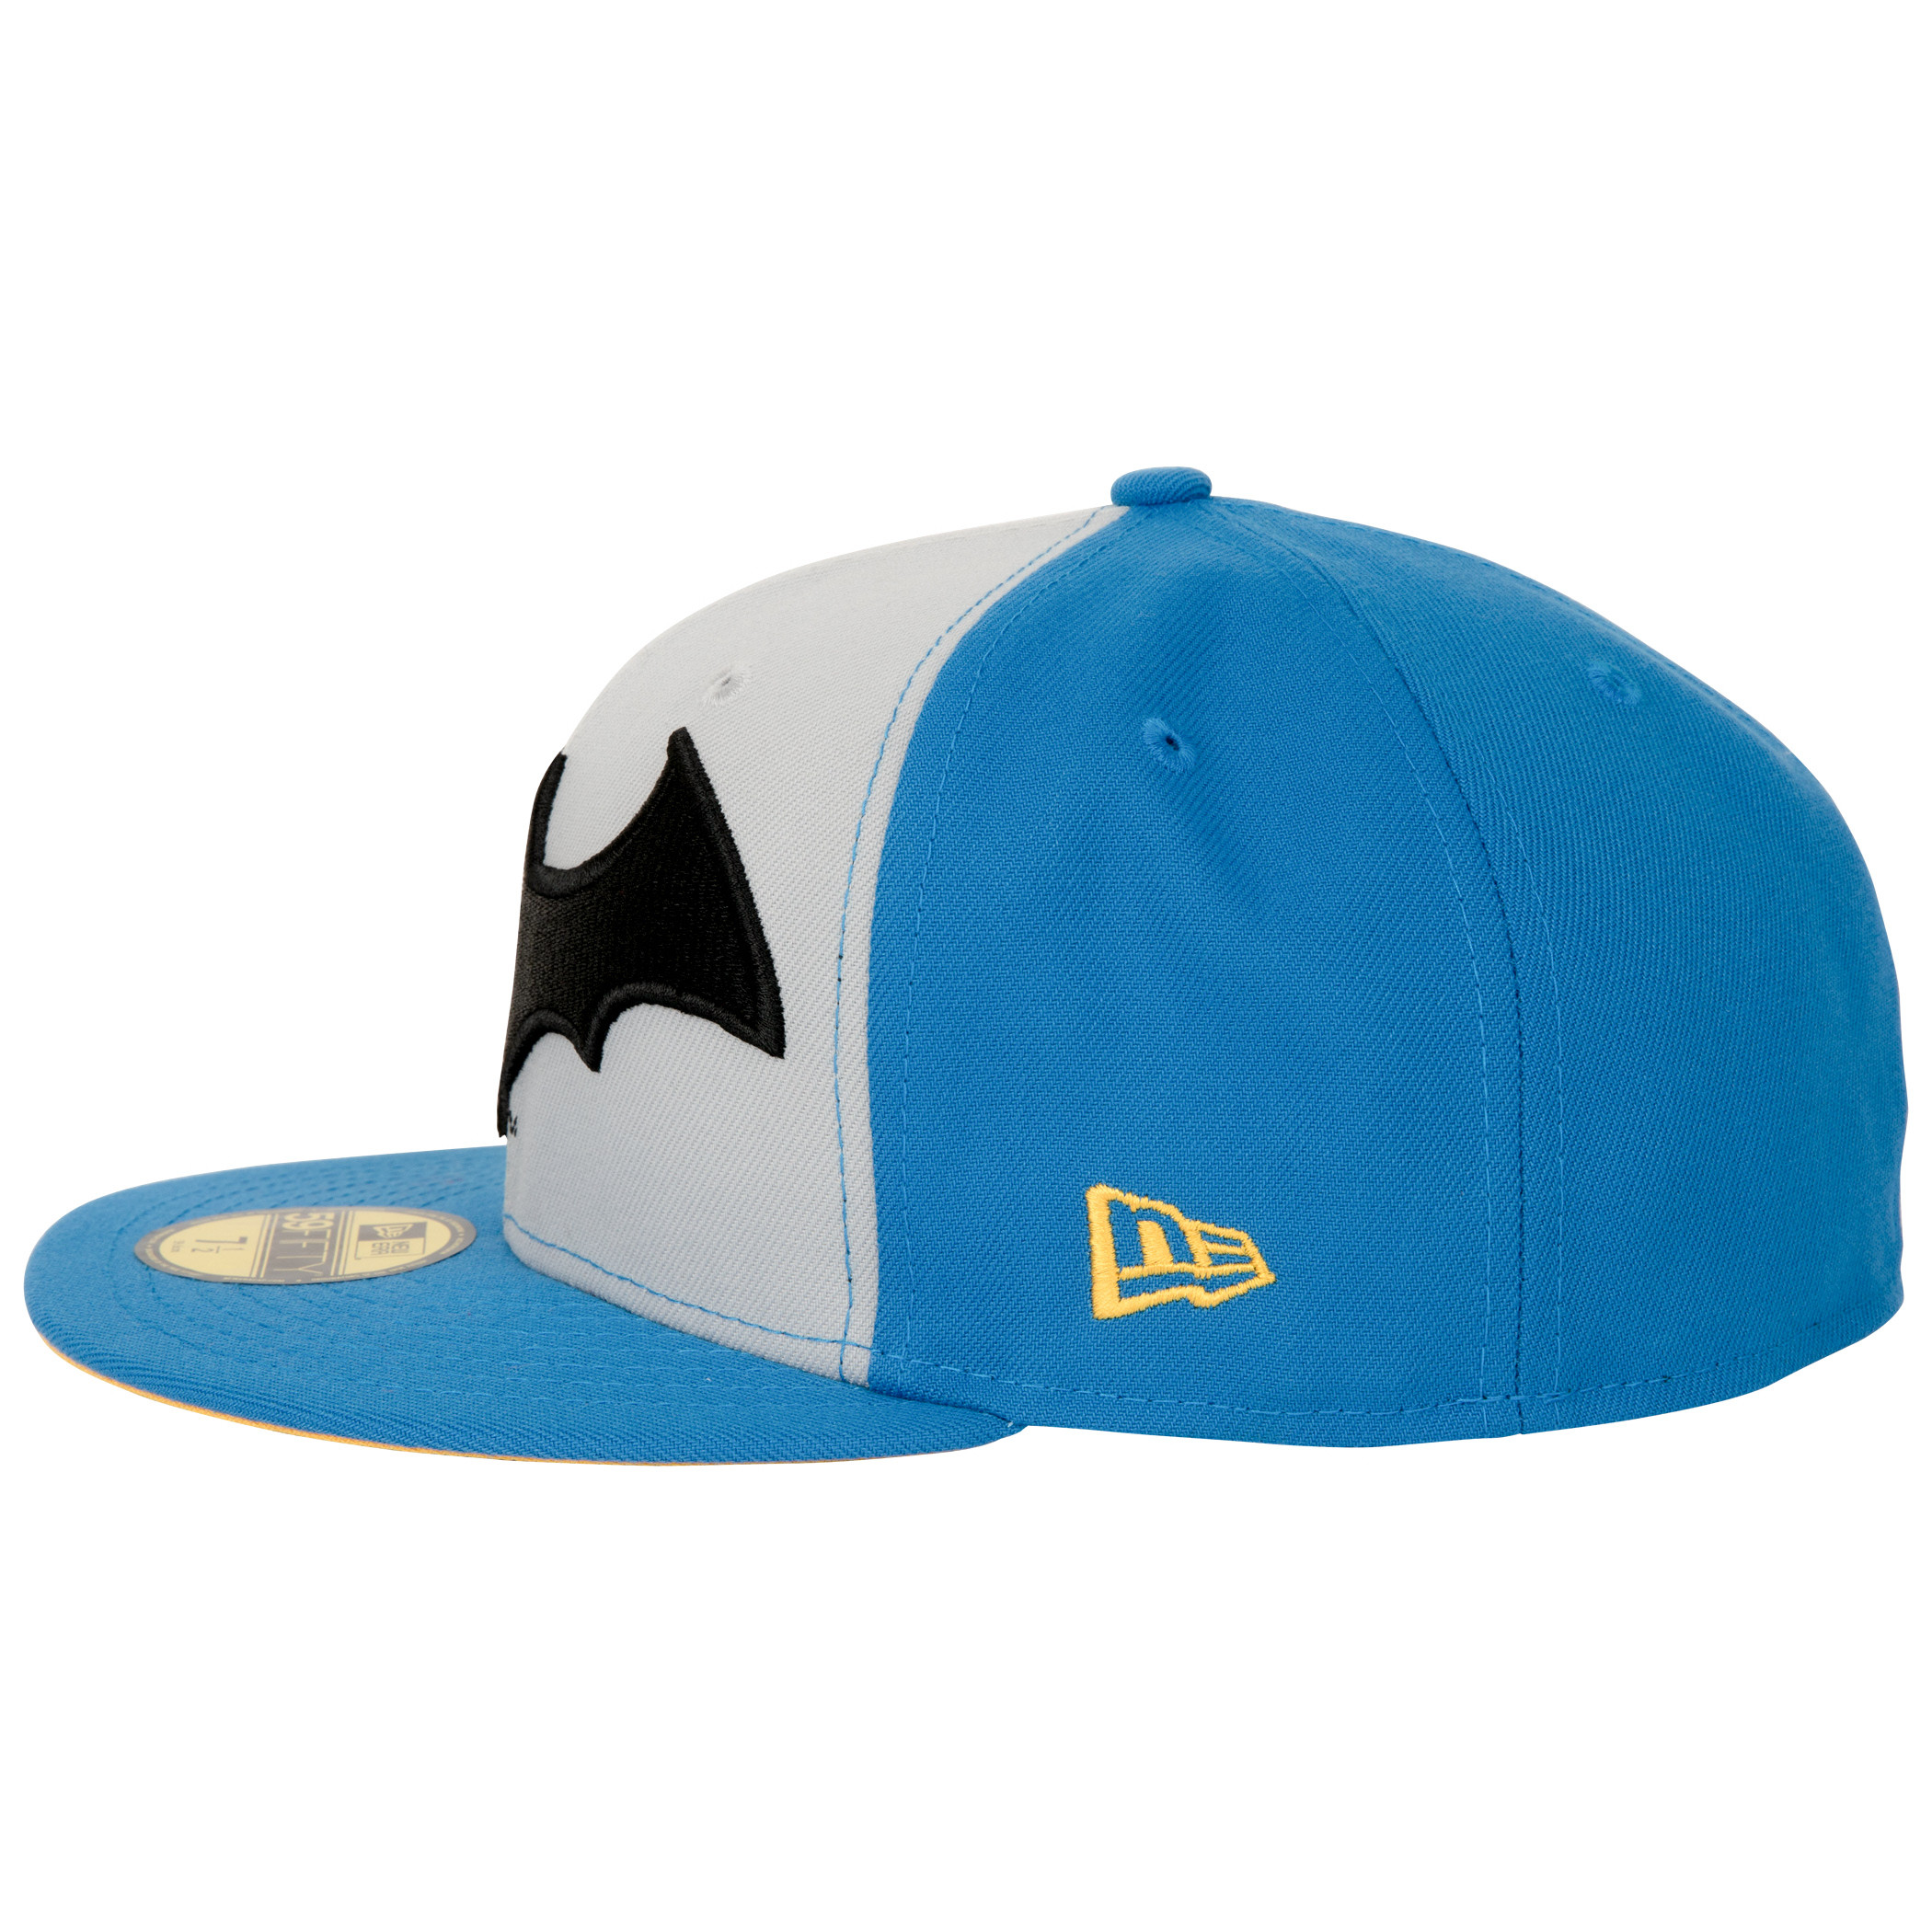 Batman Hush Character Armor New Era 59Fifty Fitted Hat